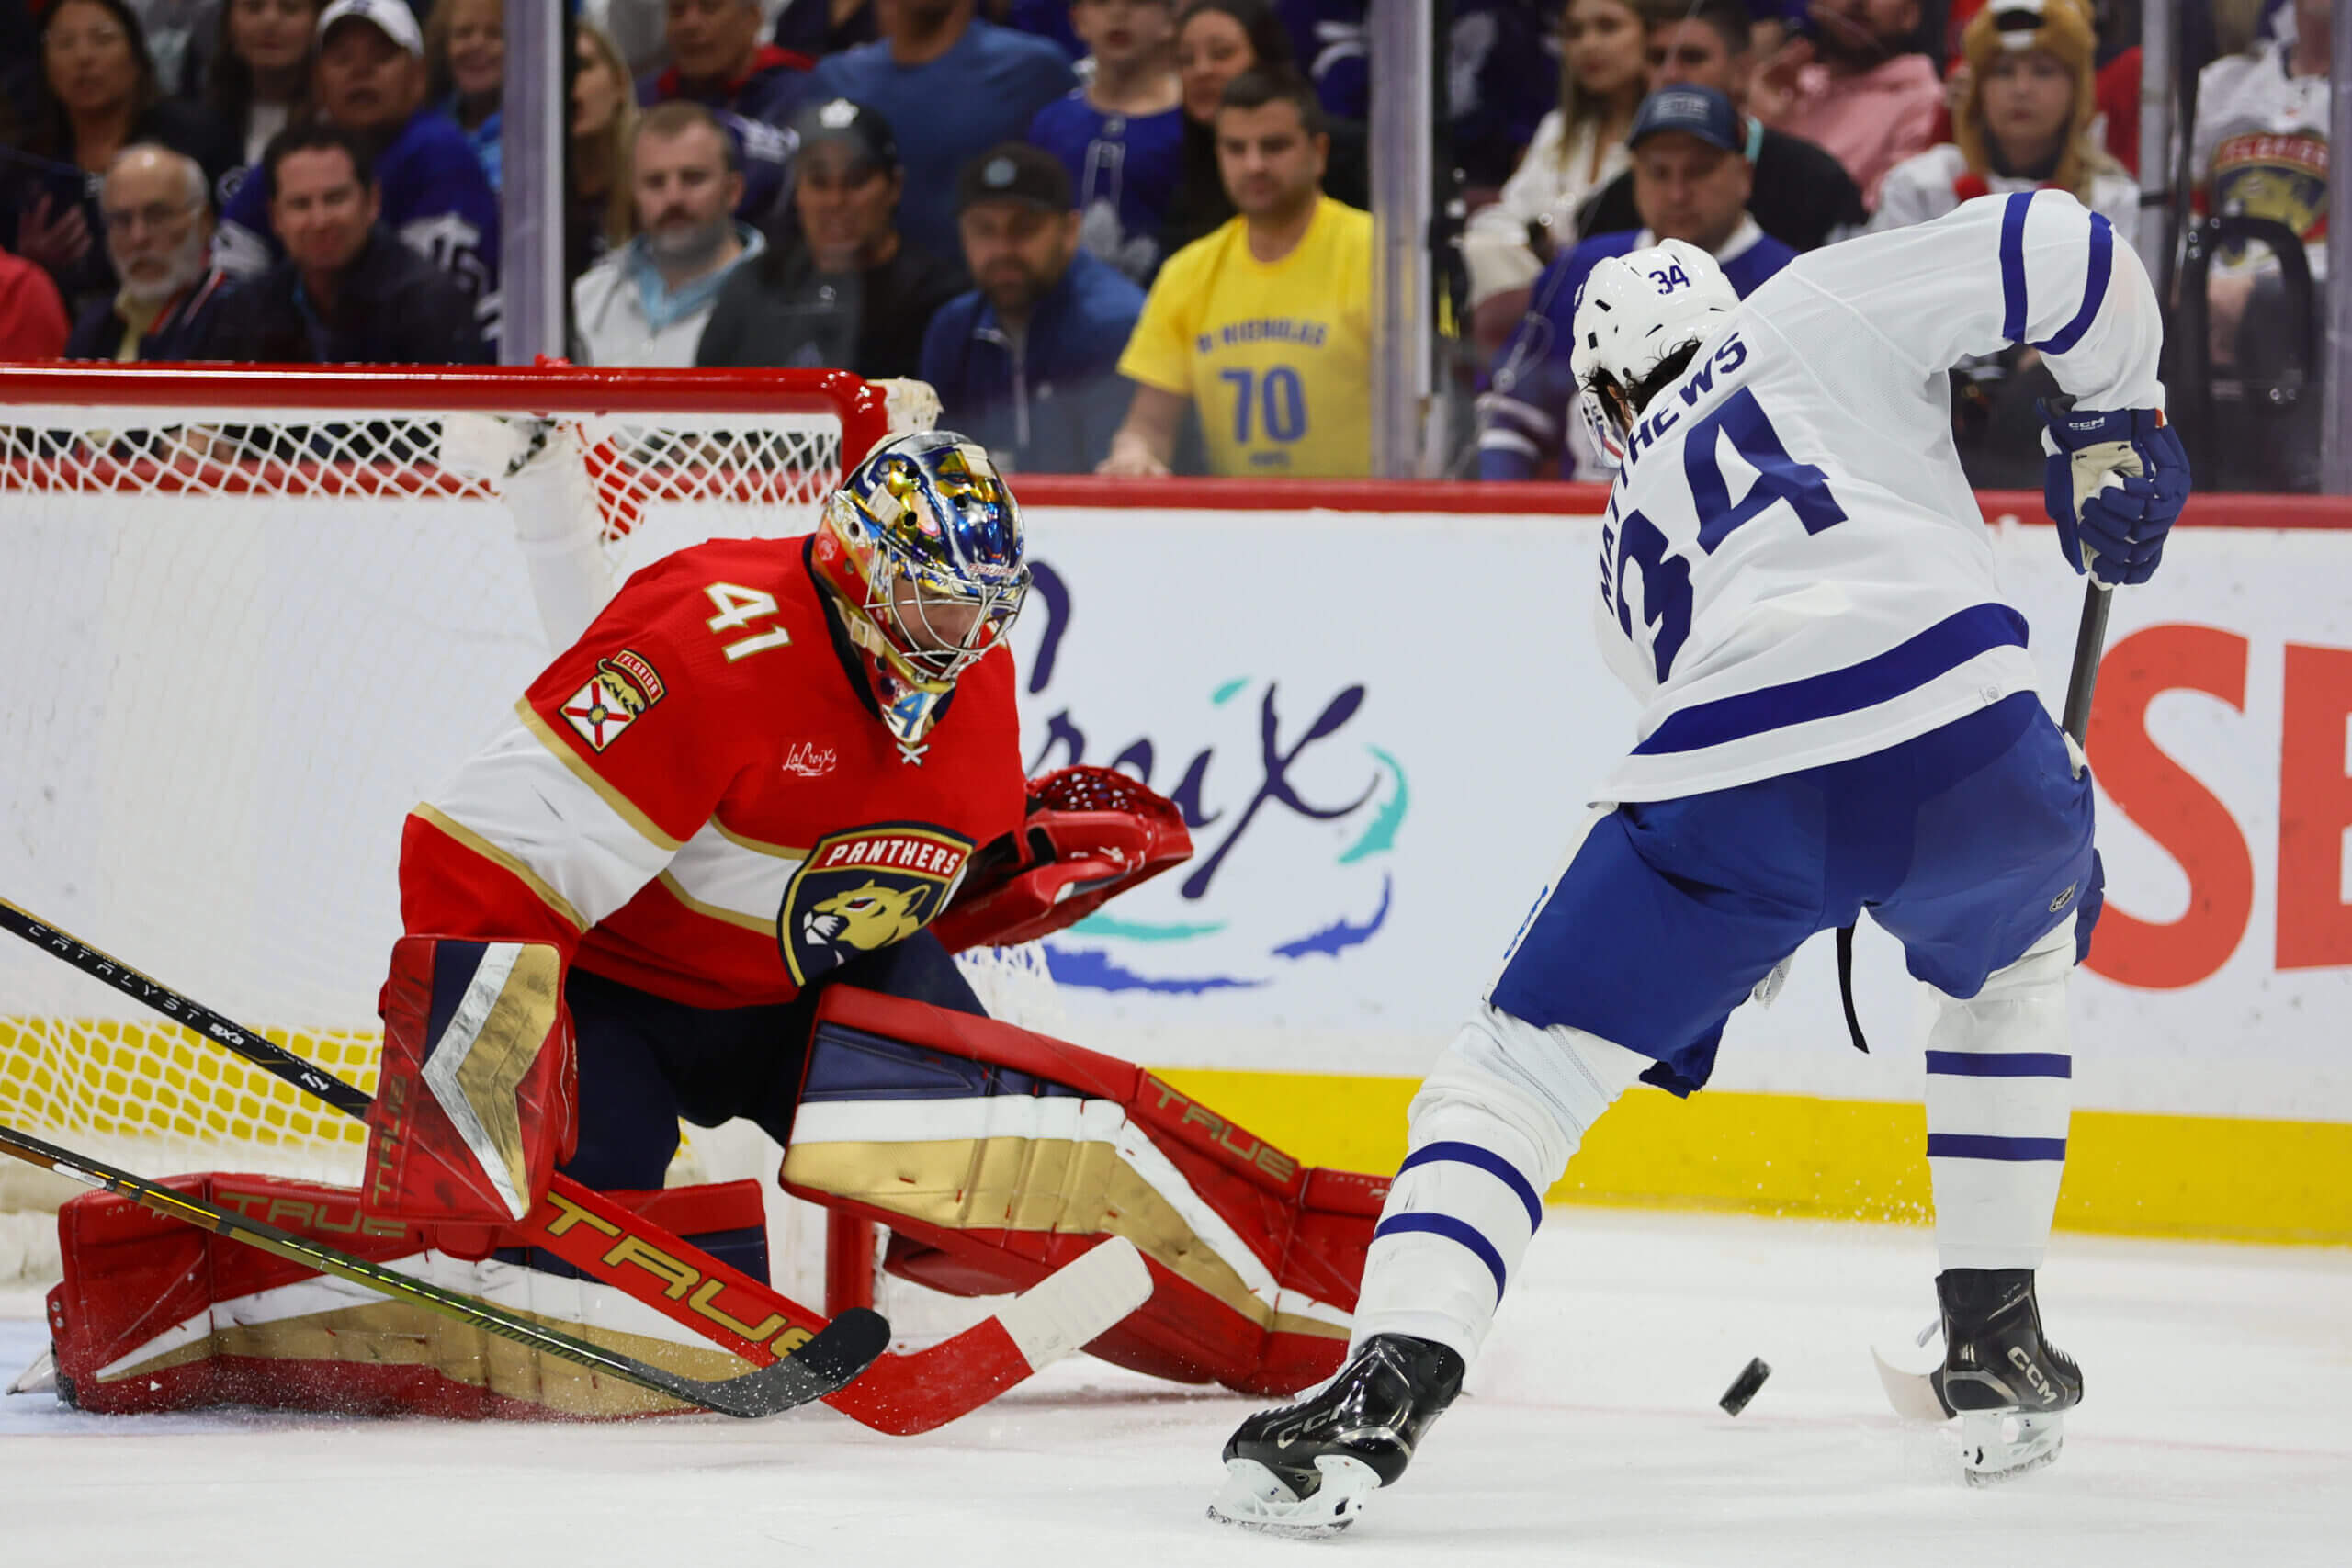 Maple Leafs vs. Panthers observations: Auston Matthews held off as playoff matchup set